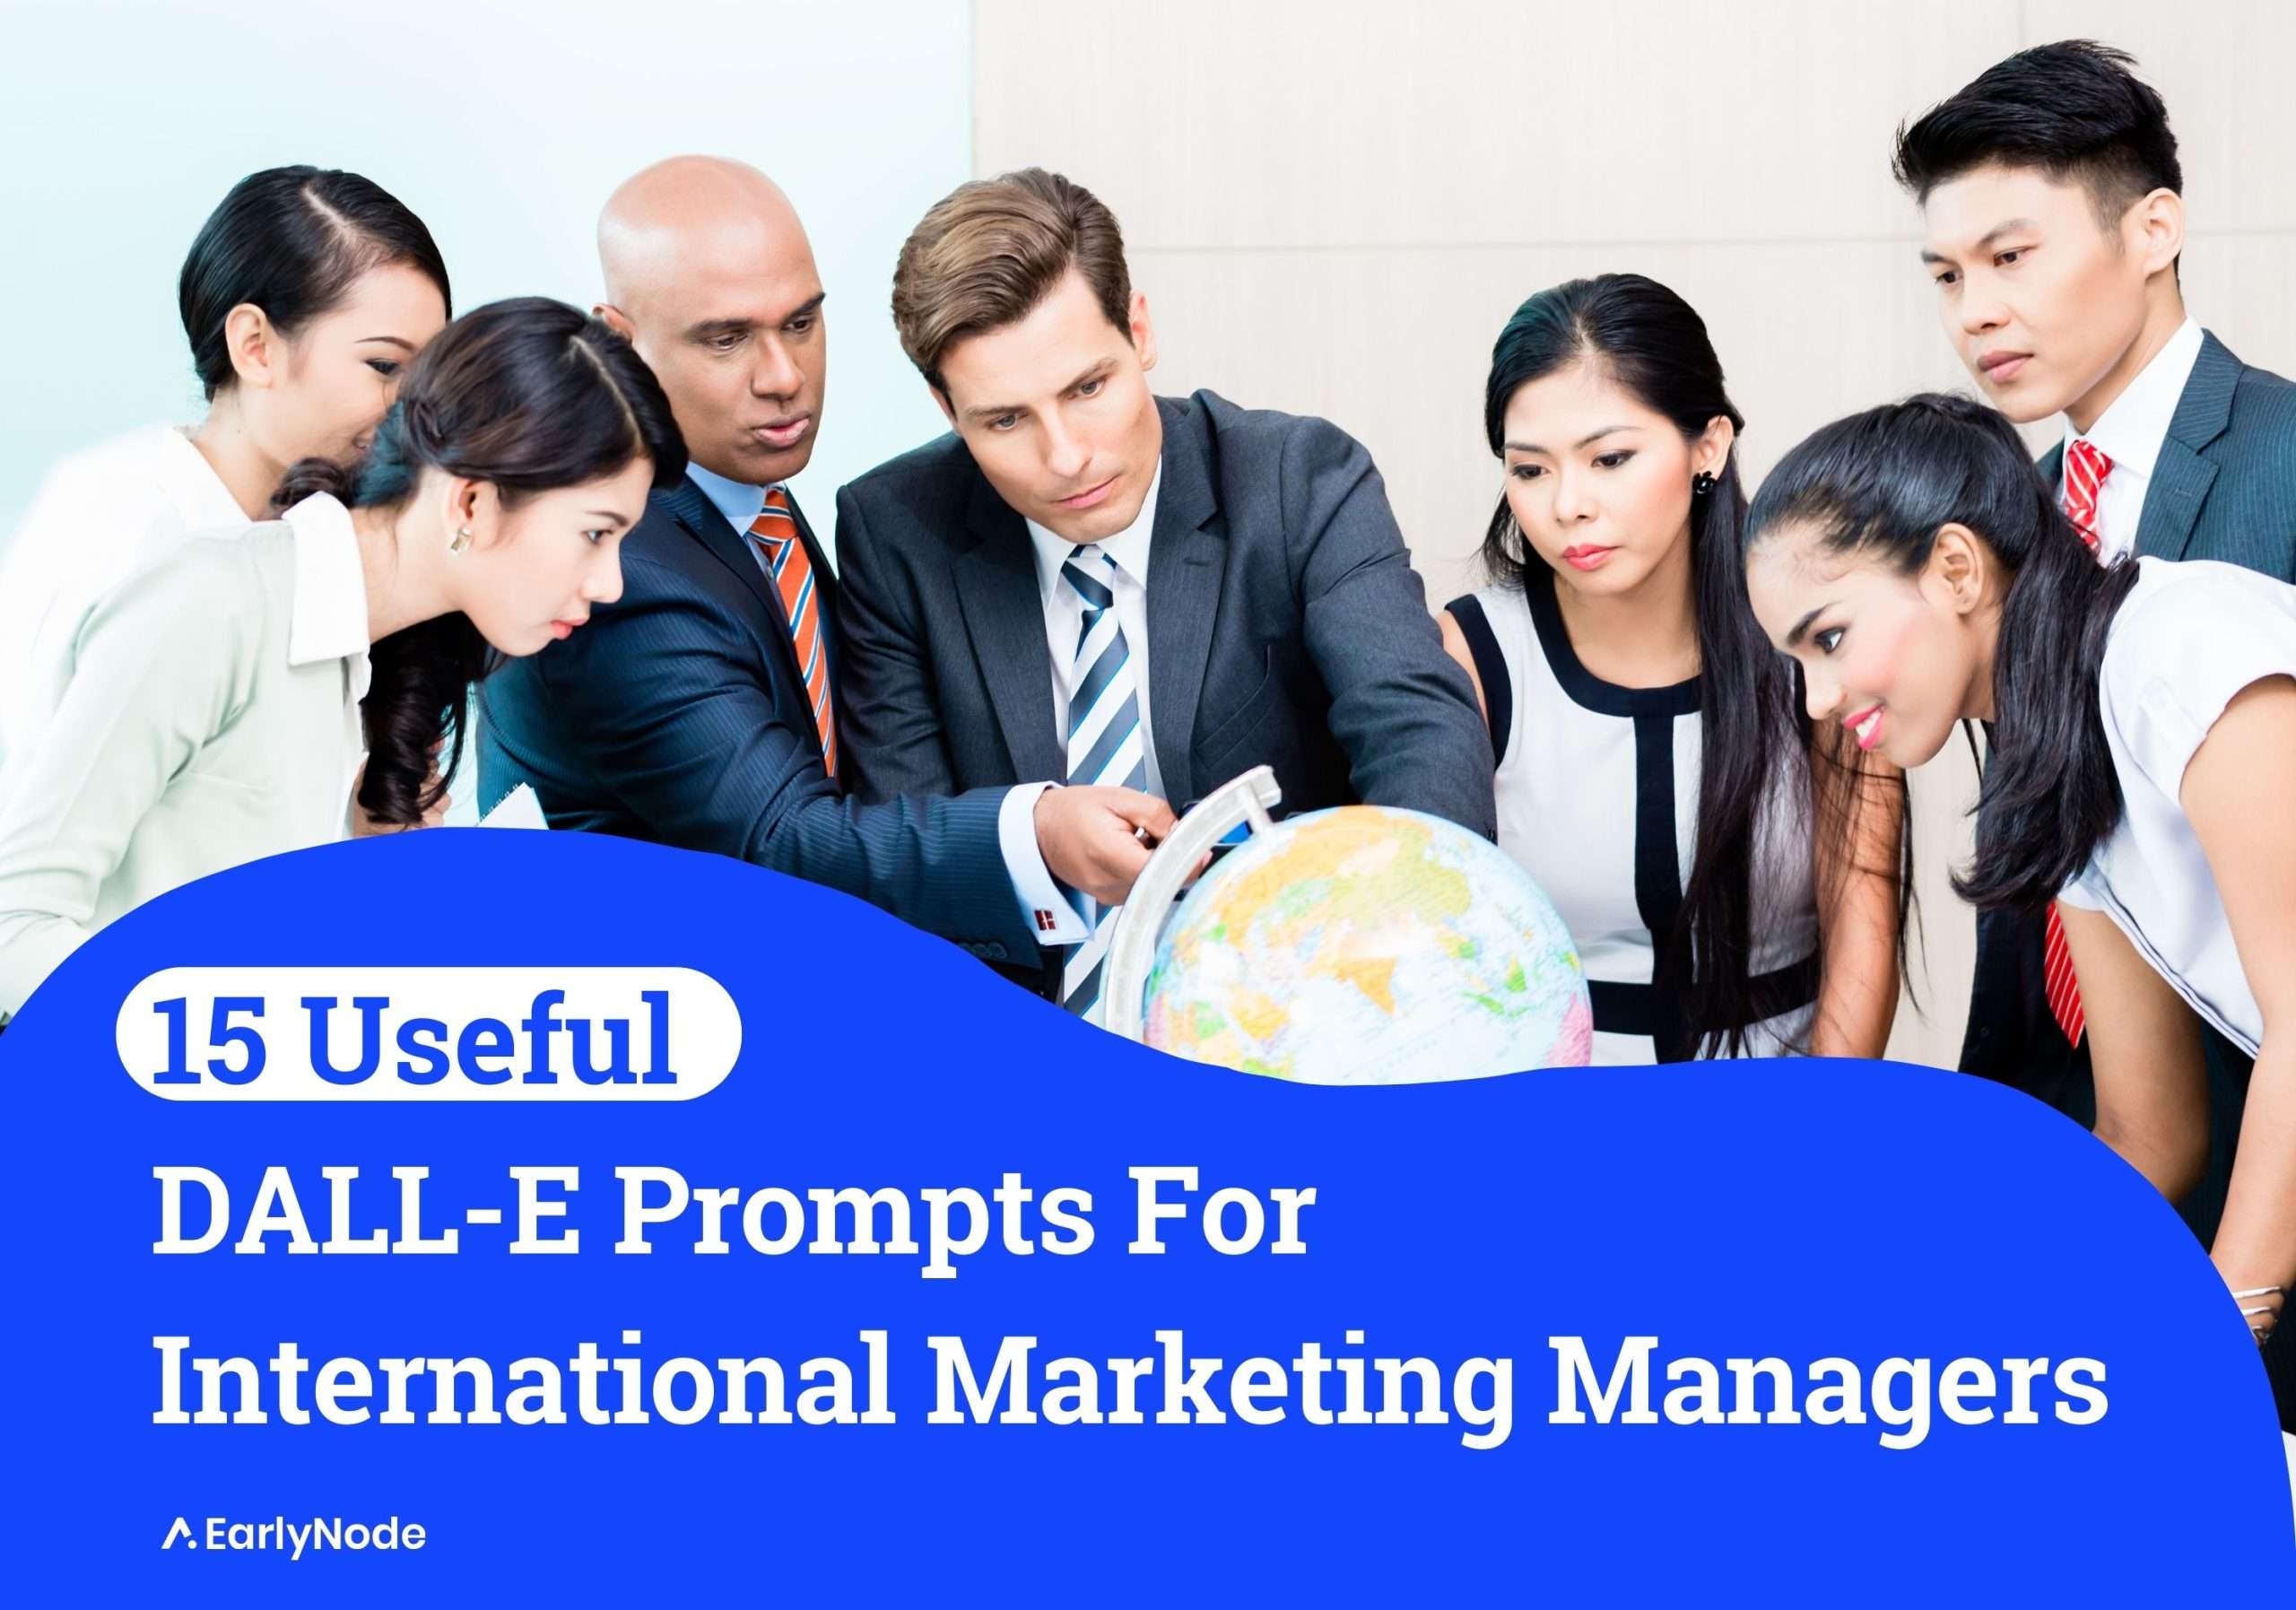 15+ Power-Packed DALL-E Prompts for International Marketing Managers